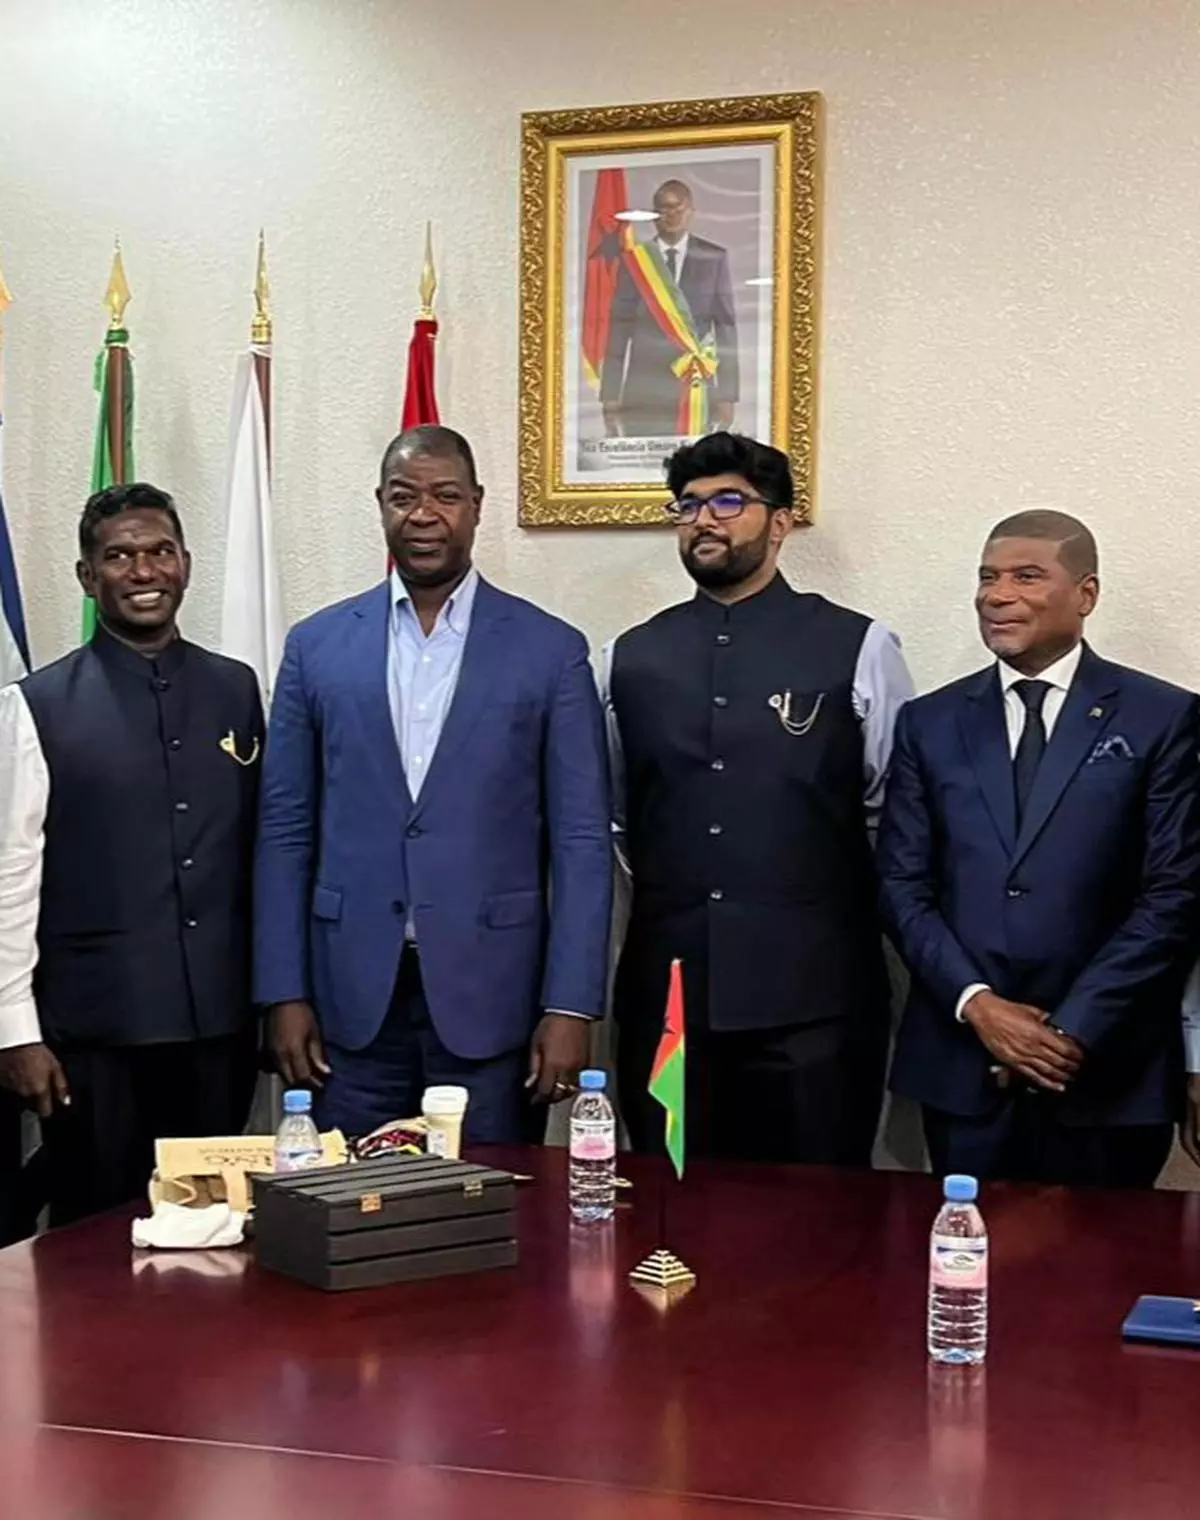 From left, J Rajmohan Pillai, Chairman, Beta Group, Nuno Gomes Nabiam, Prime Minister of Guinea-Bissau, Rajnarayanan R Pillai, Director, Beta Group and Fernando Vaz, Minister of Tourism, Guinea at the Prime minister’s office at Bissau.